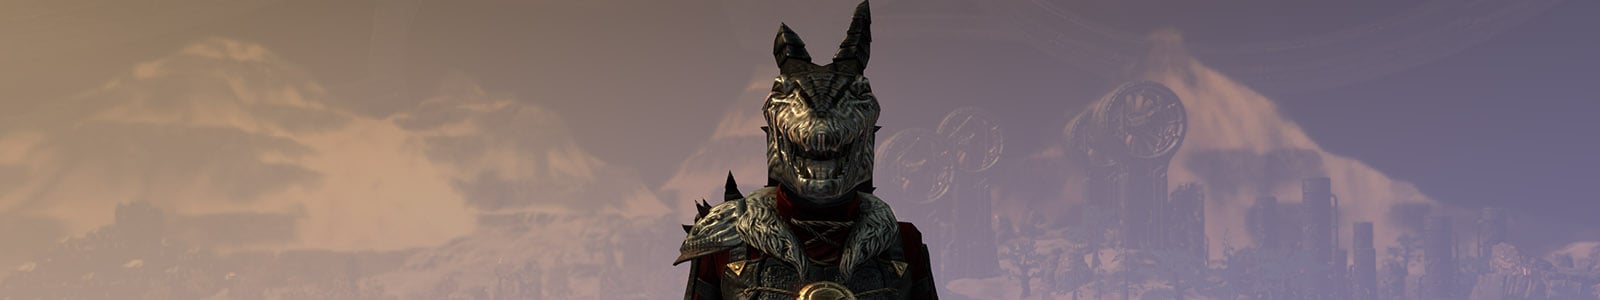 Maw of the Infernal Set - ESO header